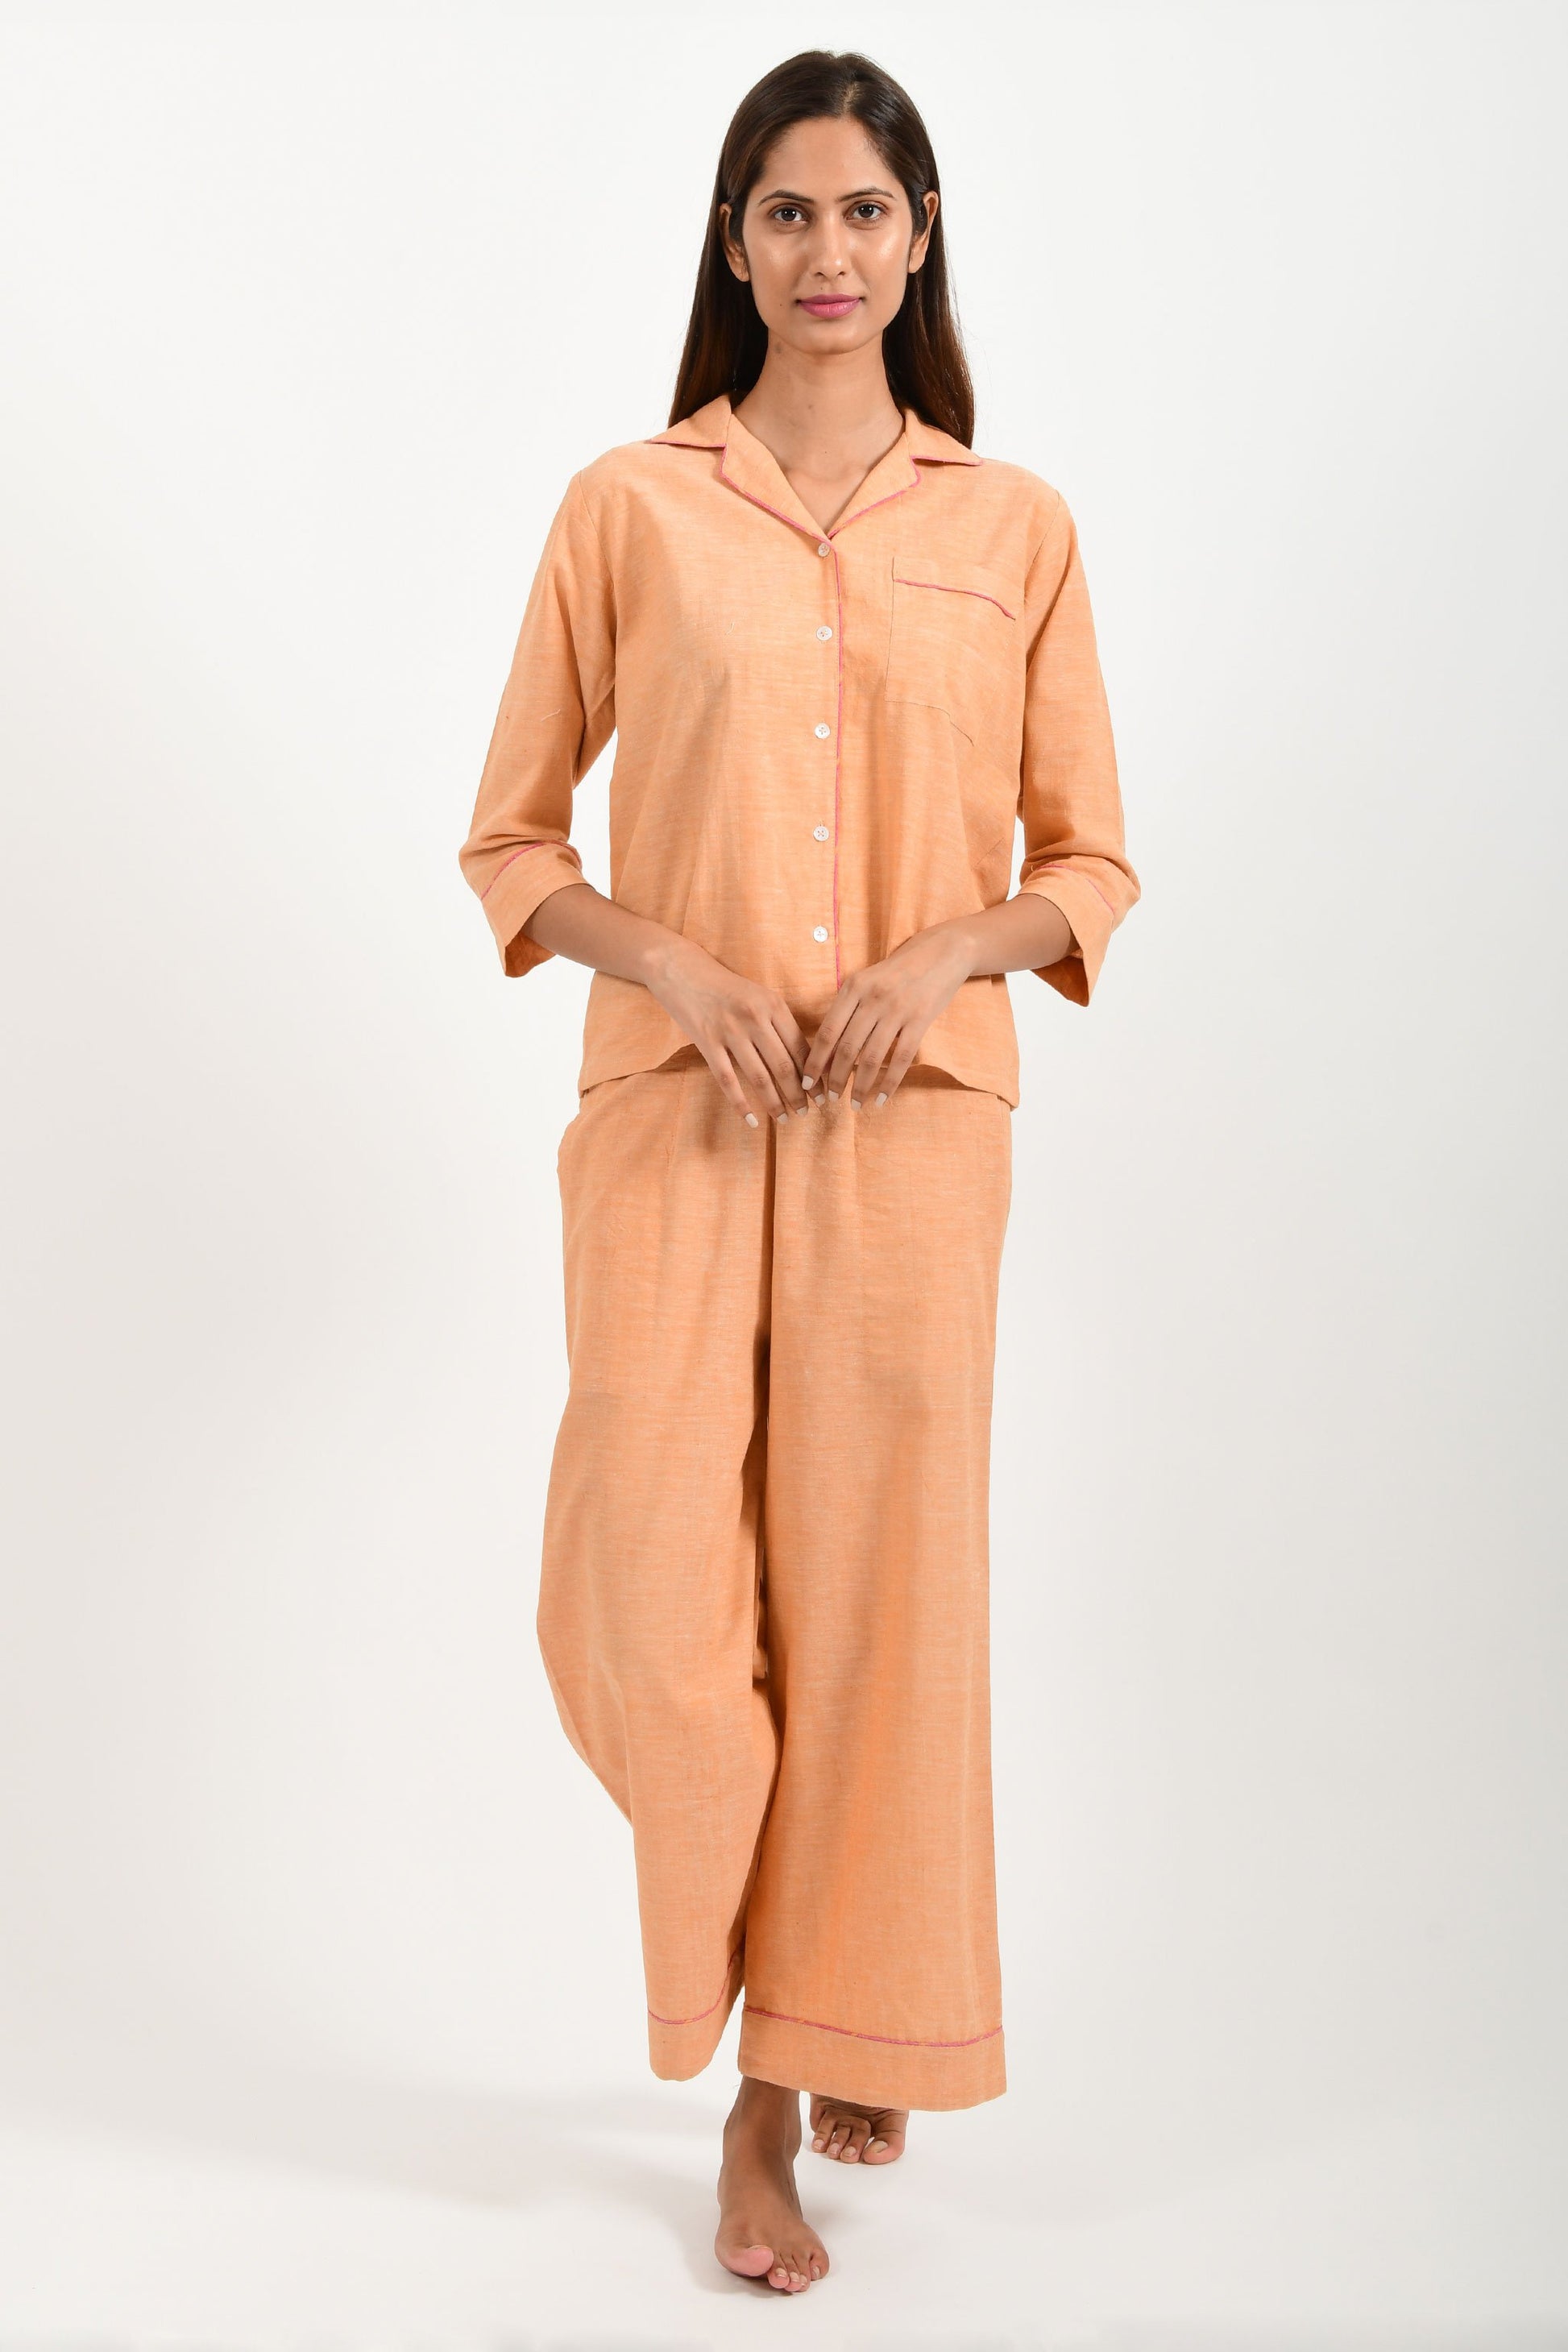 Front pose of an Indian female womenswear fashion model in azo-free dyed handspun and handwoven khadi cotton nightwear pyjama & shirt in orange chambray by Cotton Rack.